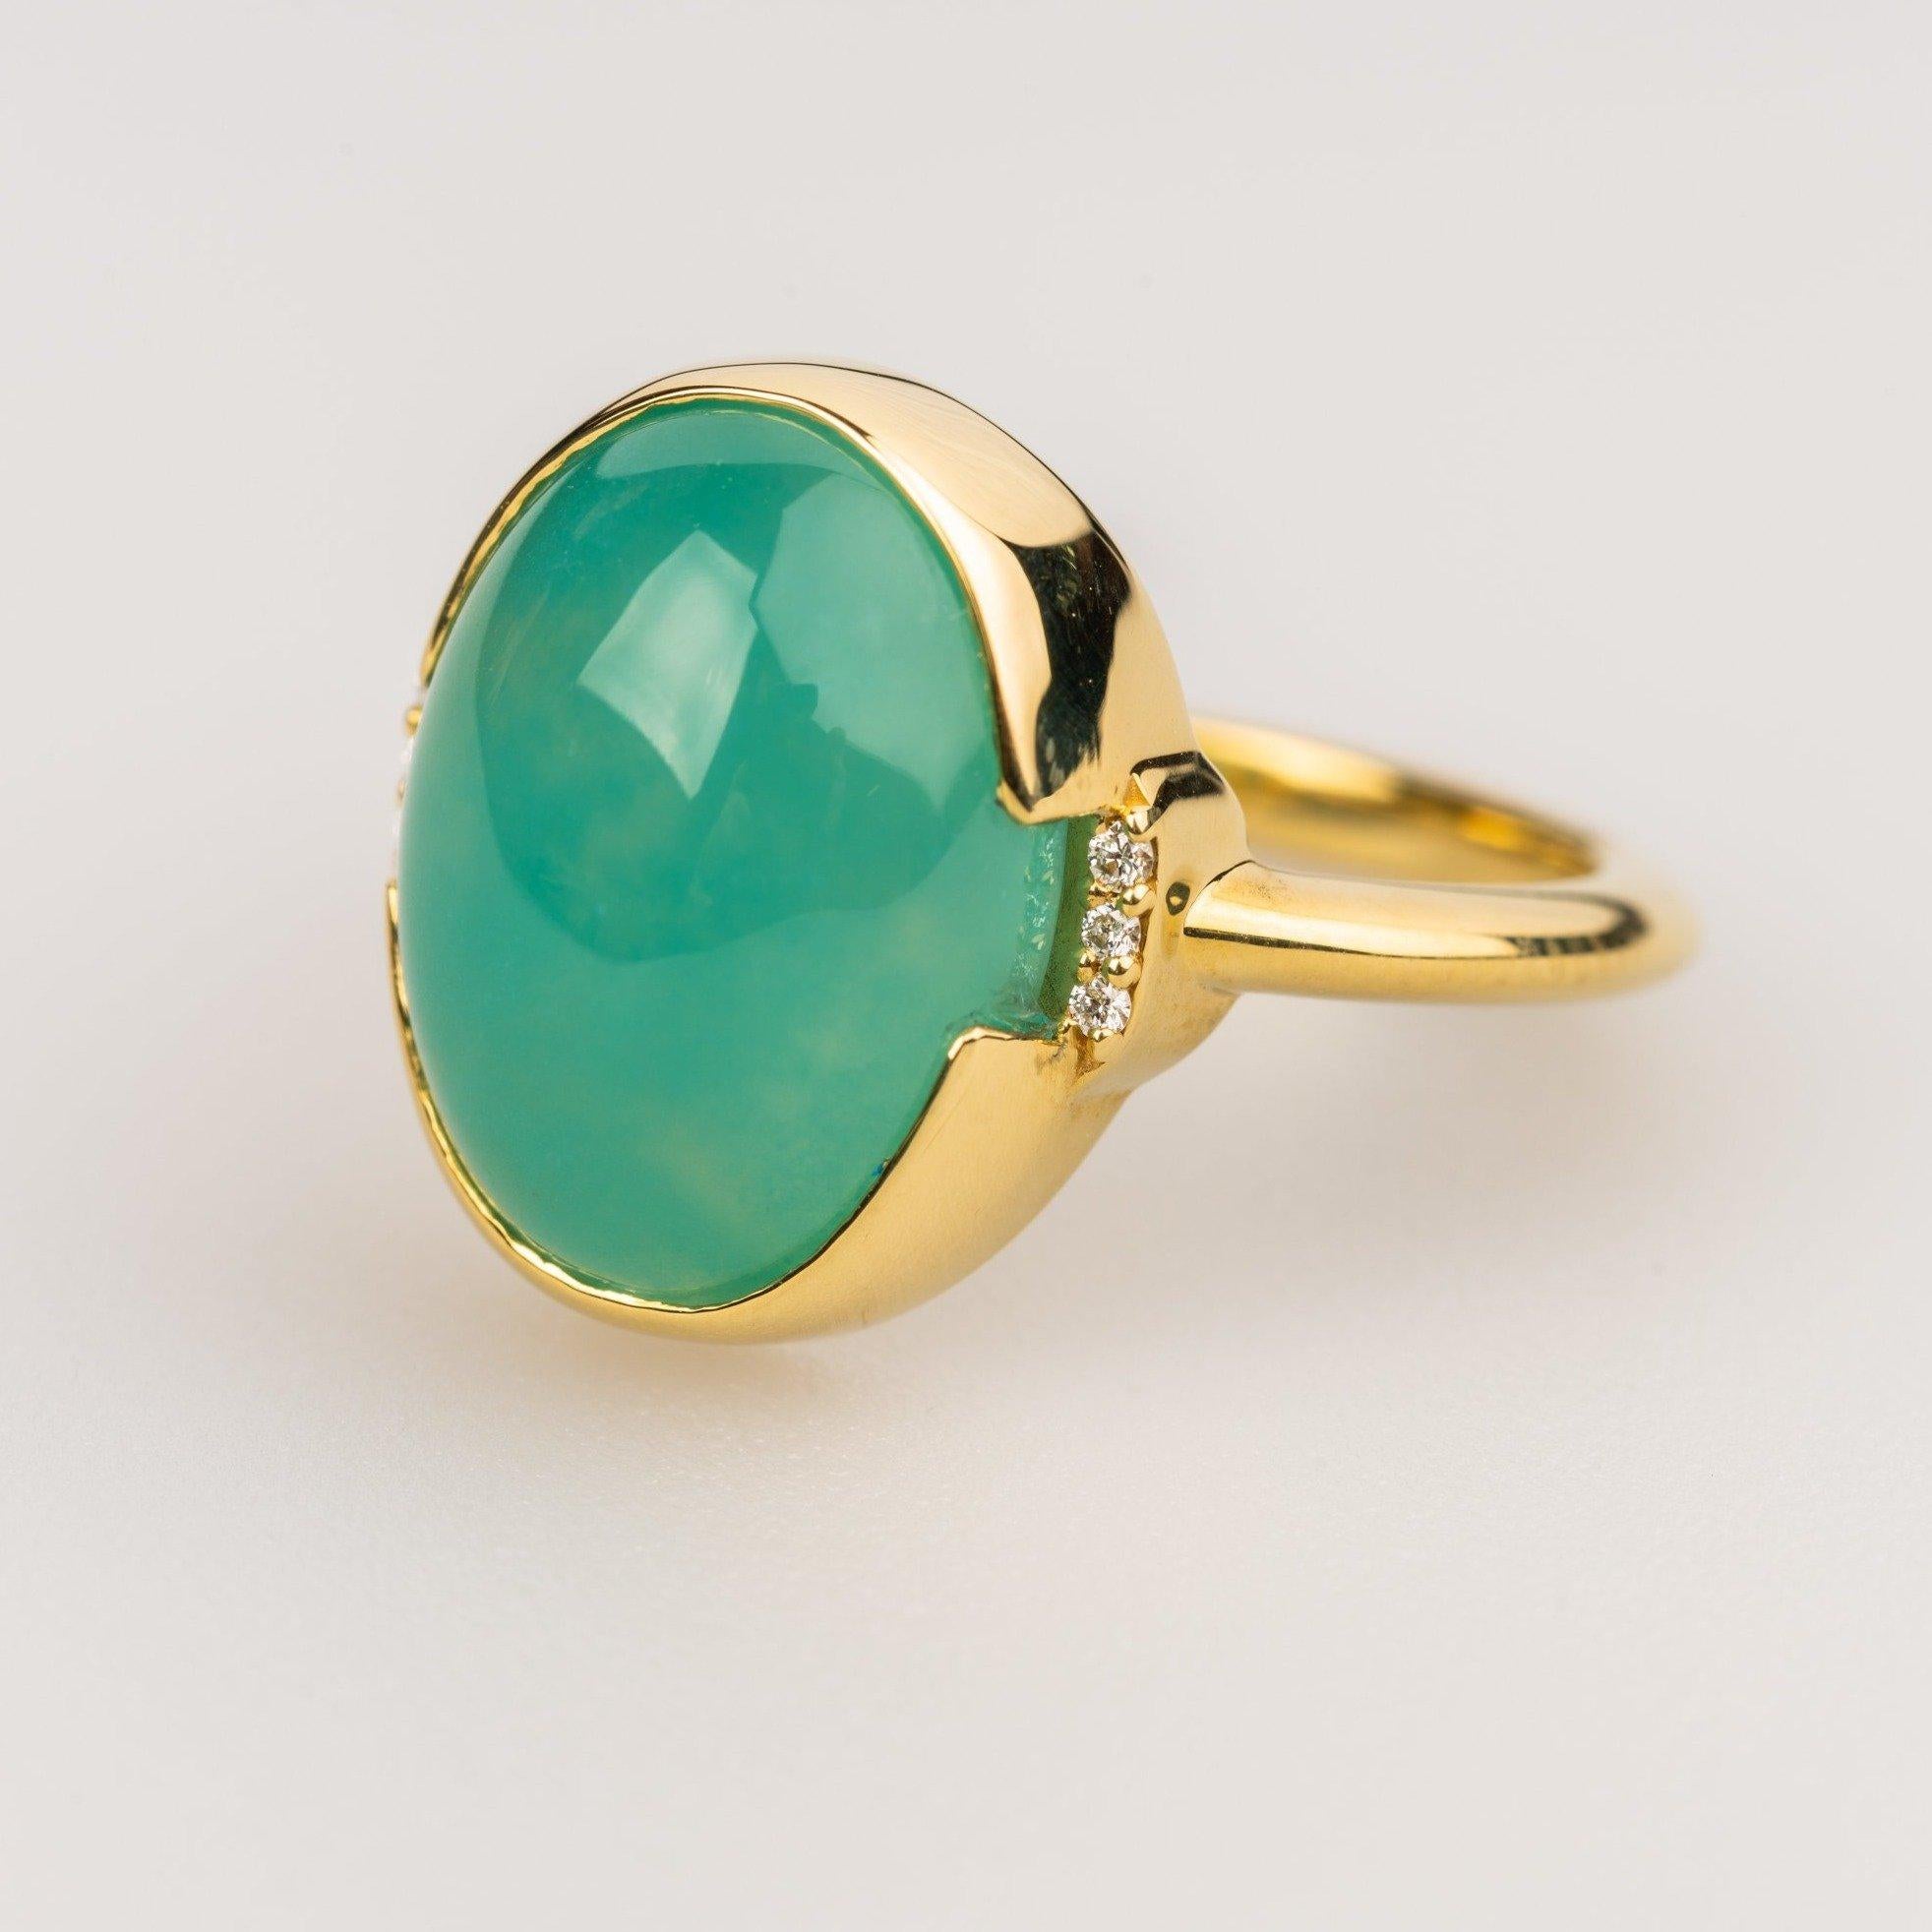 An 18k Yellow Gold Ring set with a 7.61 carat seafoam chalcedony and .03 carat F color VS clarity white diamonds. Ring size 6.5. This ring was made and designed by Sydney Strong.